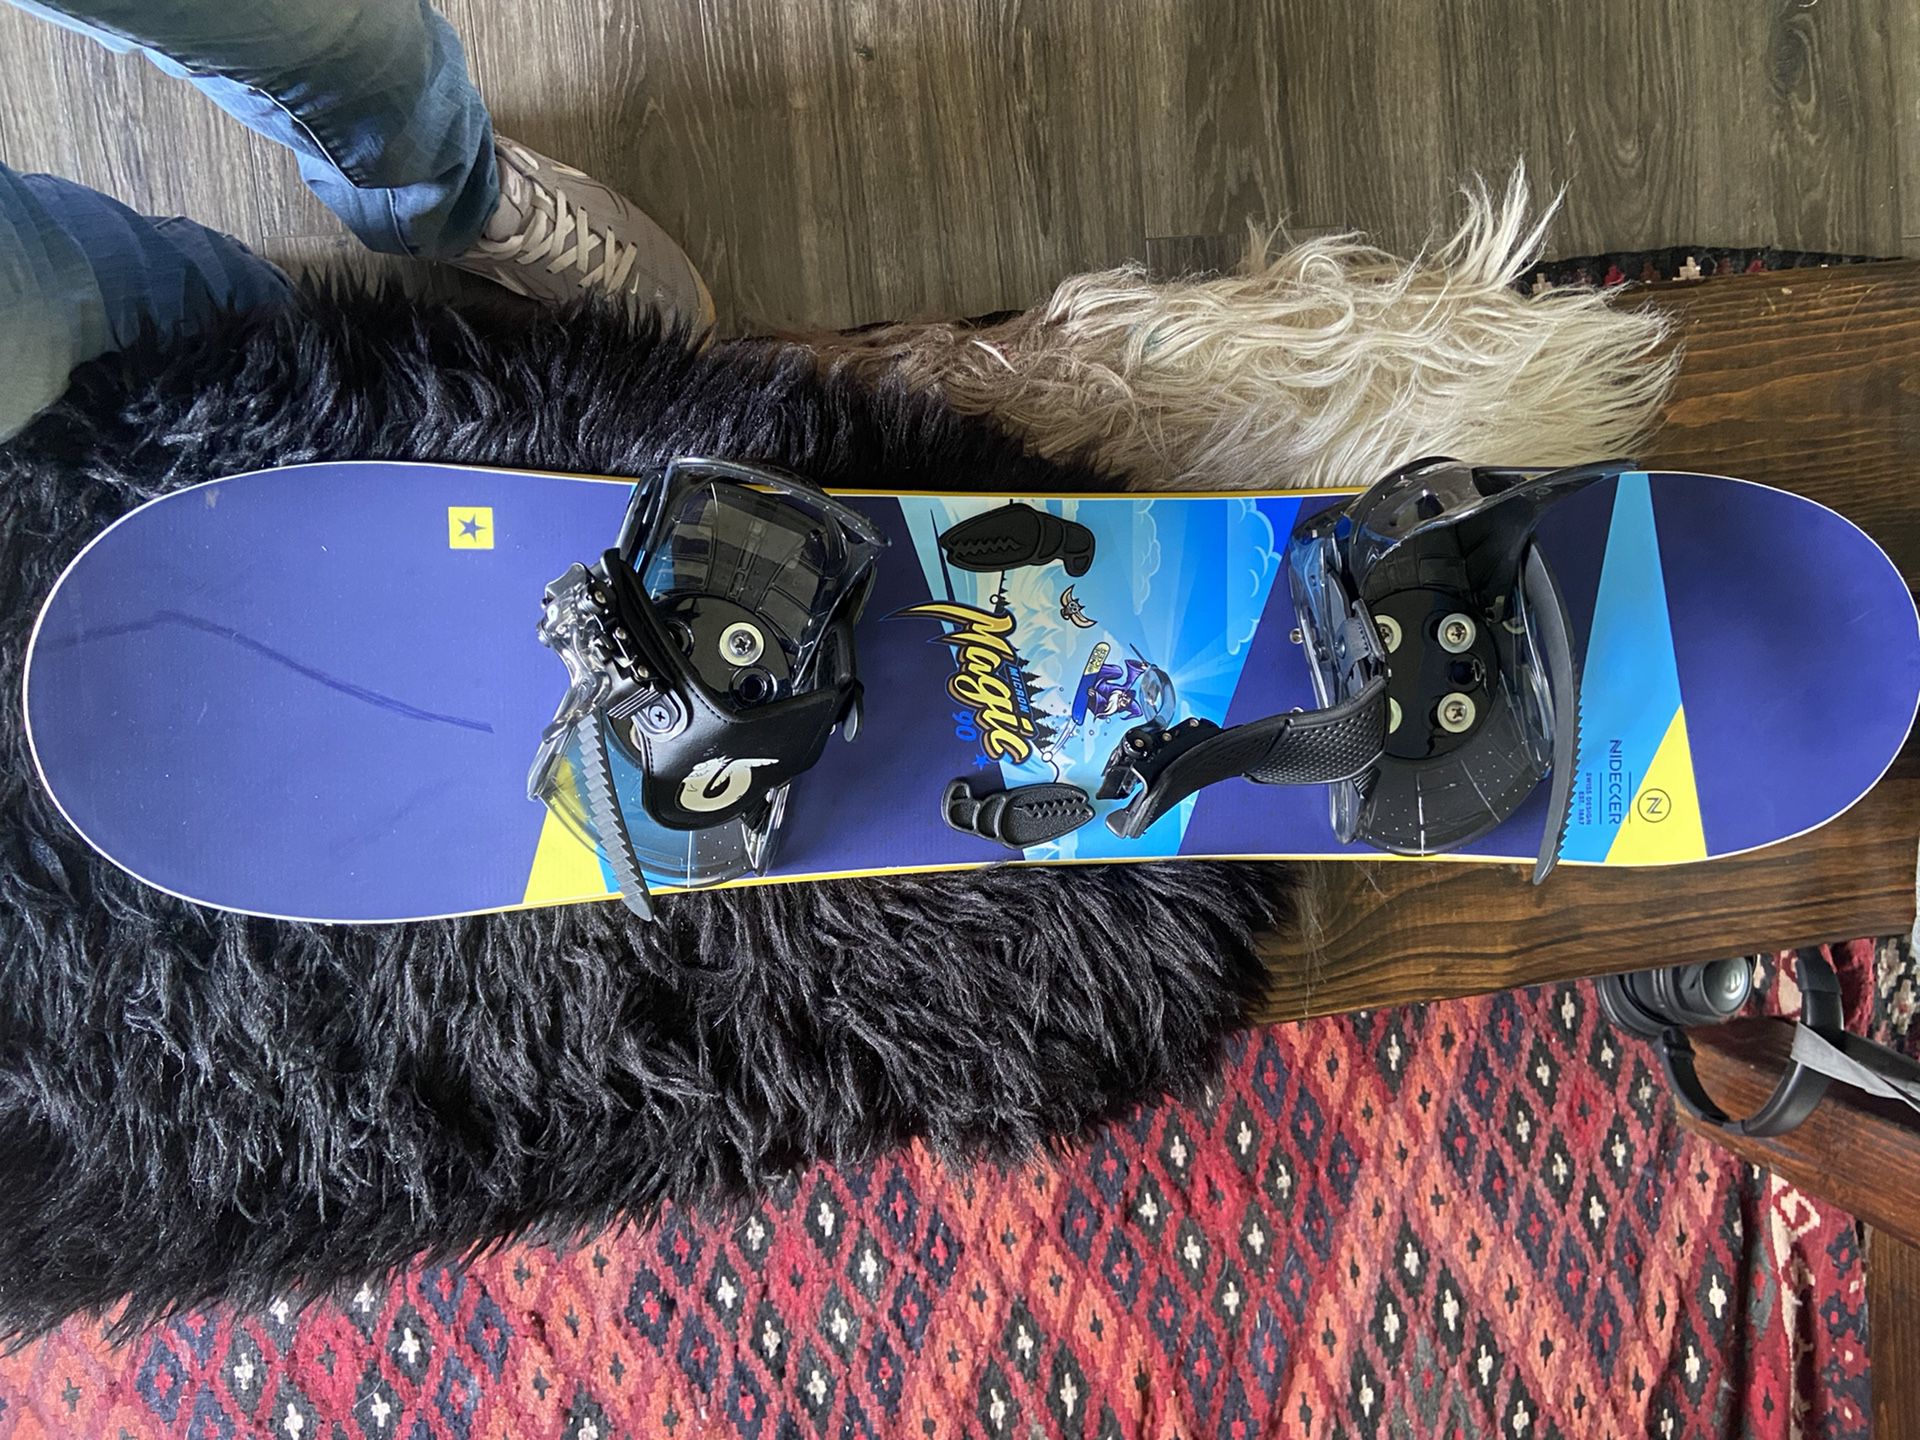 Nidecker Micron Magic Snowboard for Sale in - OfferUp